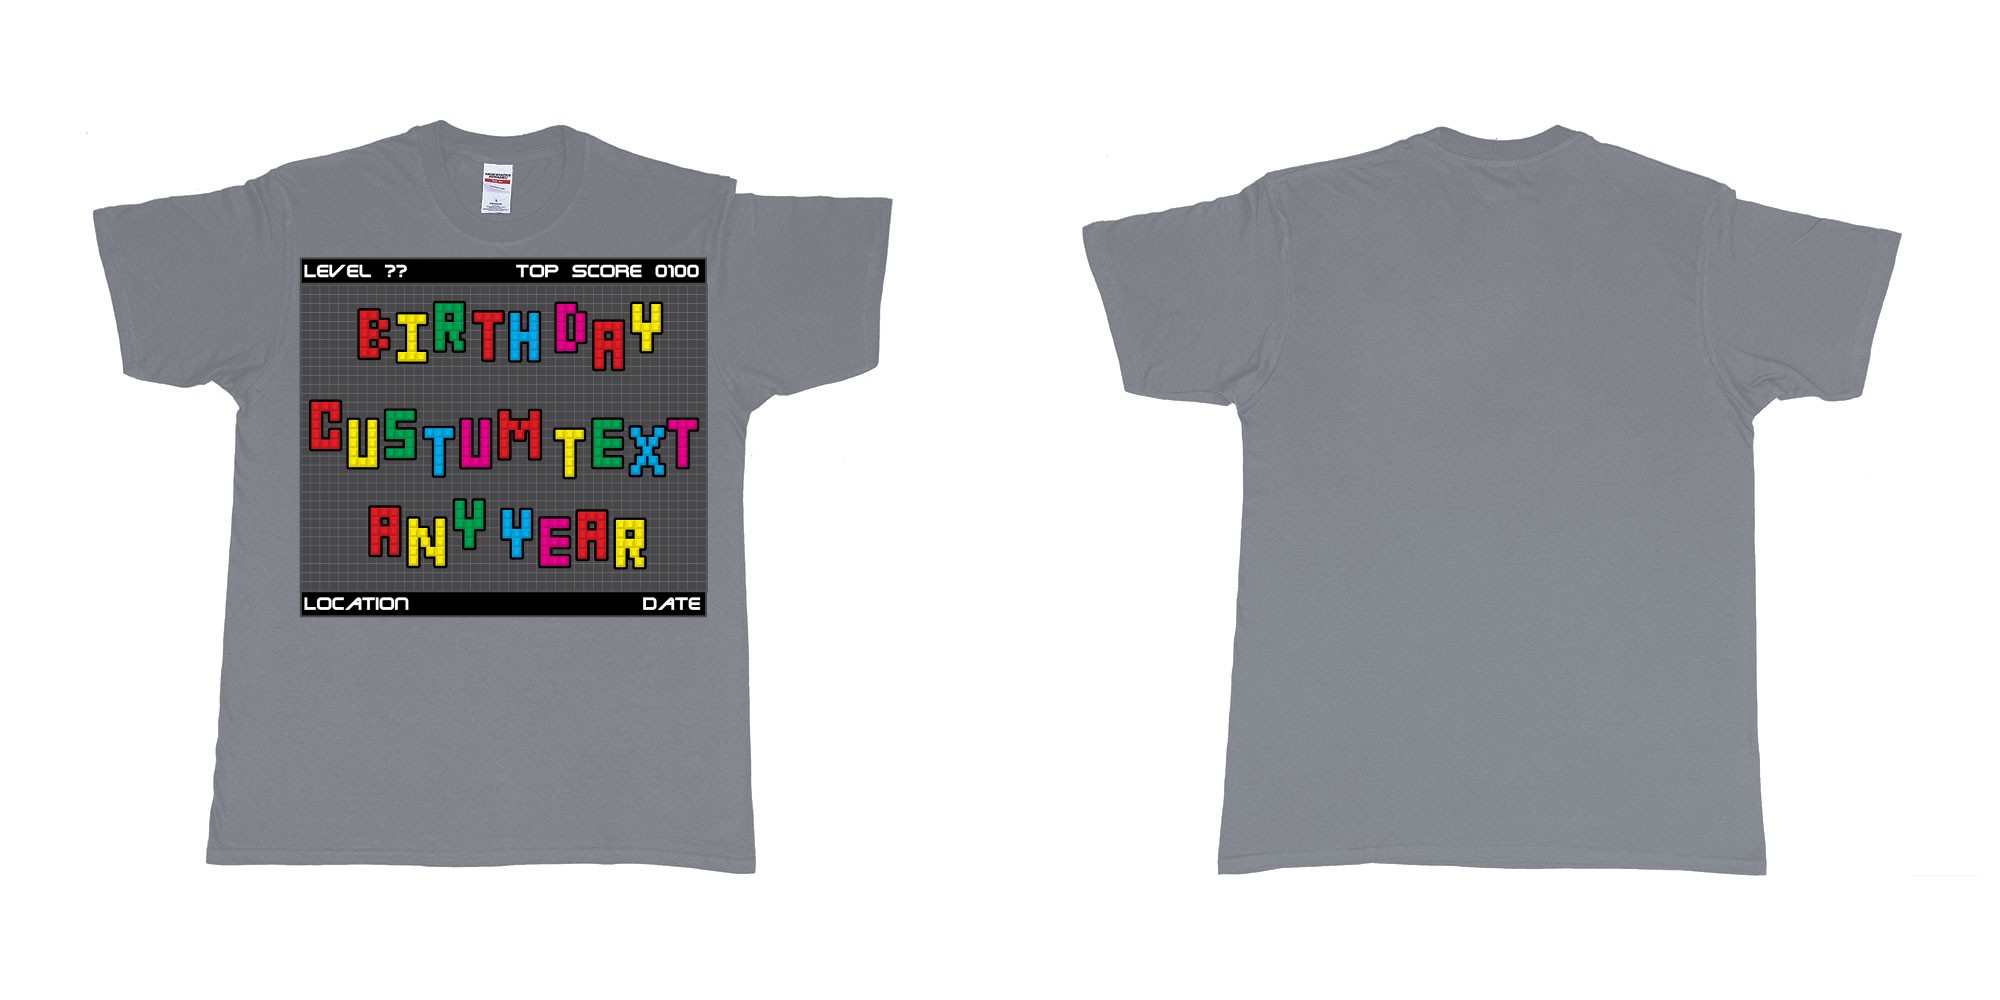 Custom tshirt design tetris block custom text birthday in fabric color misty choice your own text made in Bali by The Pirate Way